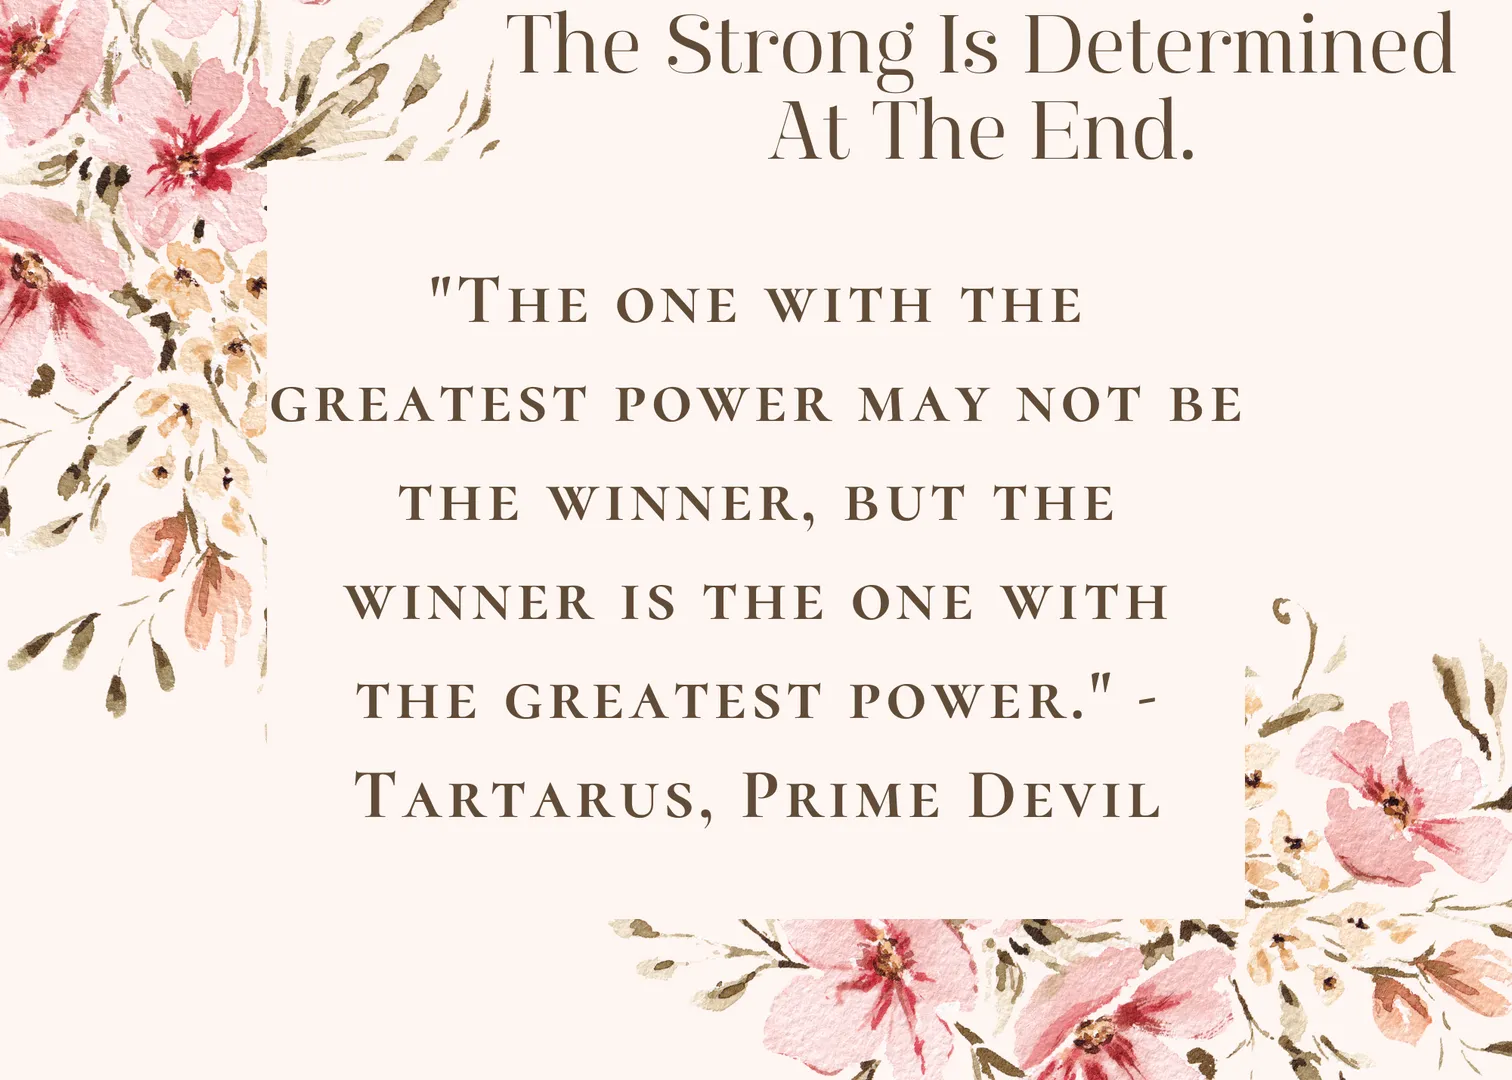 Godwrath Lore Quote: The Strong Is Determined At The End
The quote can be found in the post's image.

Get today's quote on OpenSea for free! Make It yours!

https://opensea.io/assets/ethereum/0x495f947276749ce646f68ac8c248420045cb7b5e/54110518708055511570961916387100735752108288770146632882064646613334463879024

#quotes #crypto #NFTart #nft #Gamedev #Nftartist #wisdom #truth #motivation #inspiration